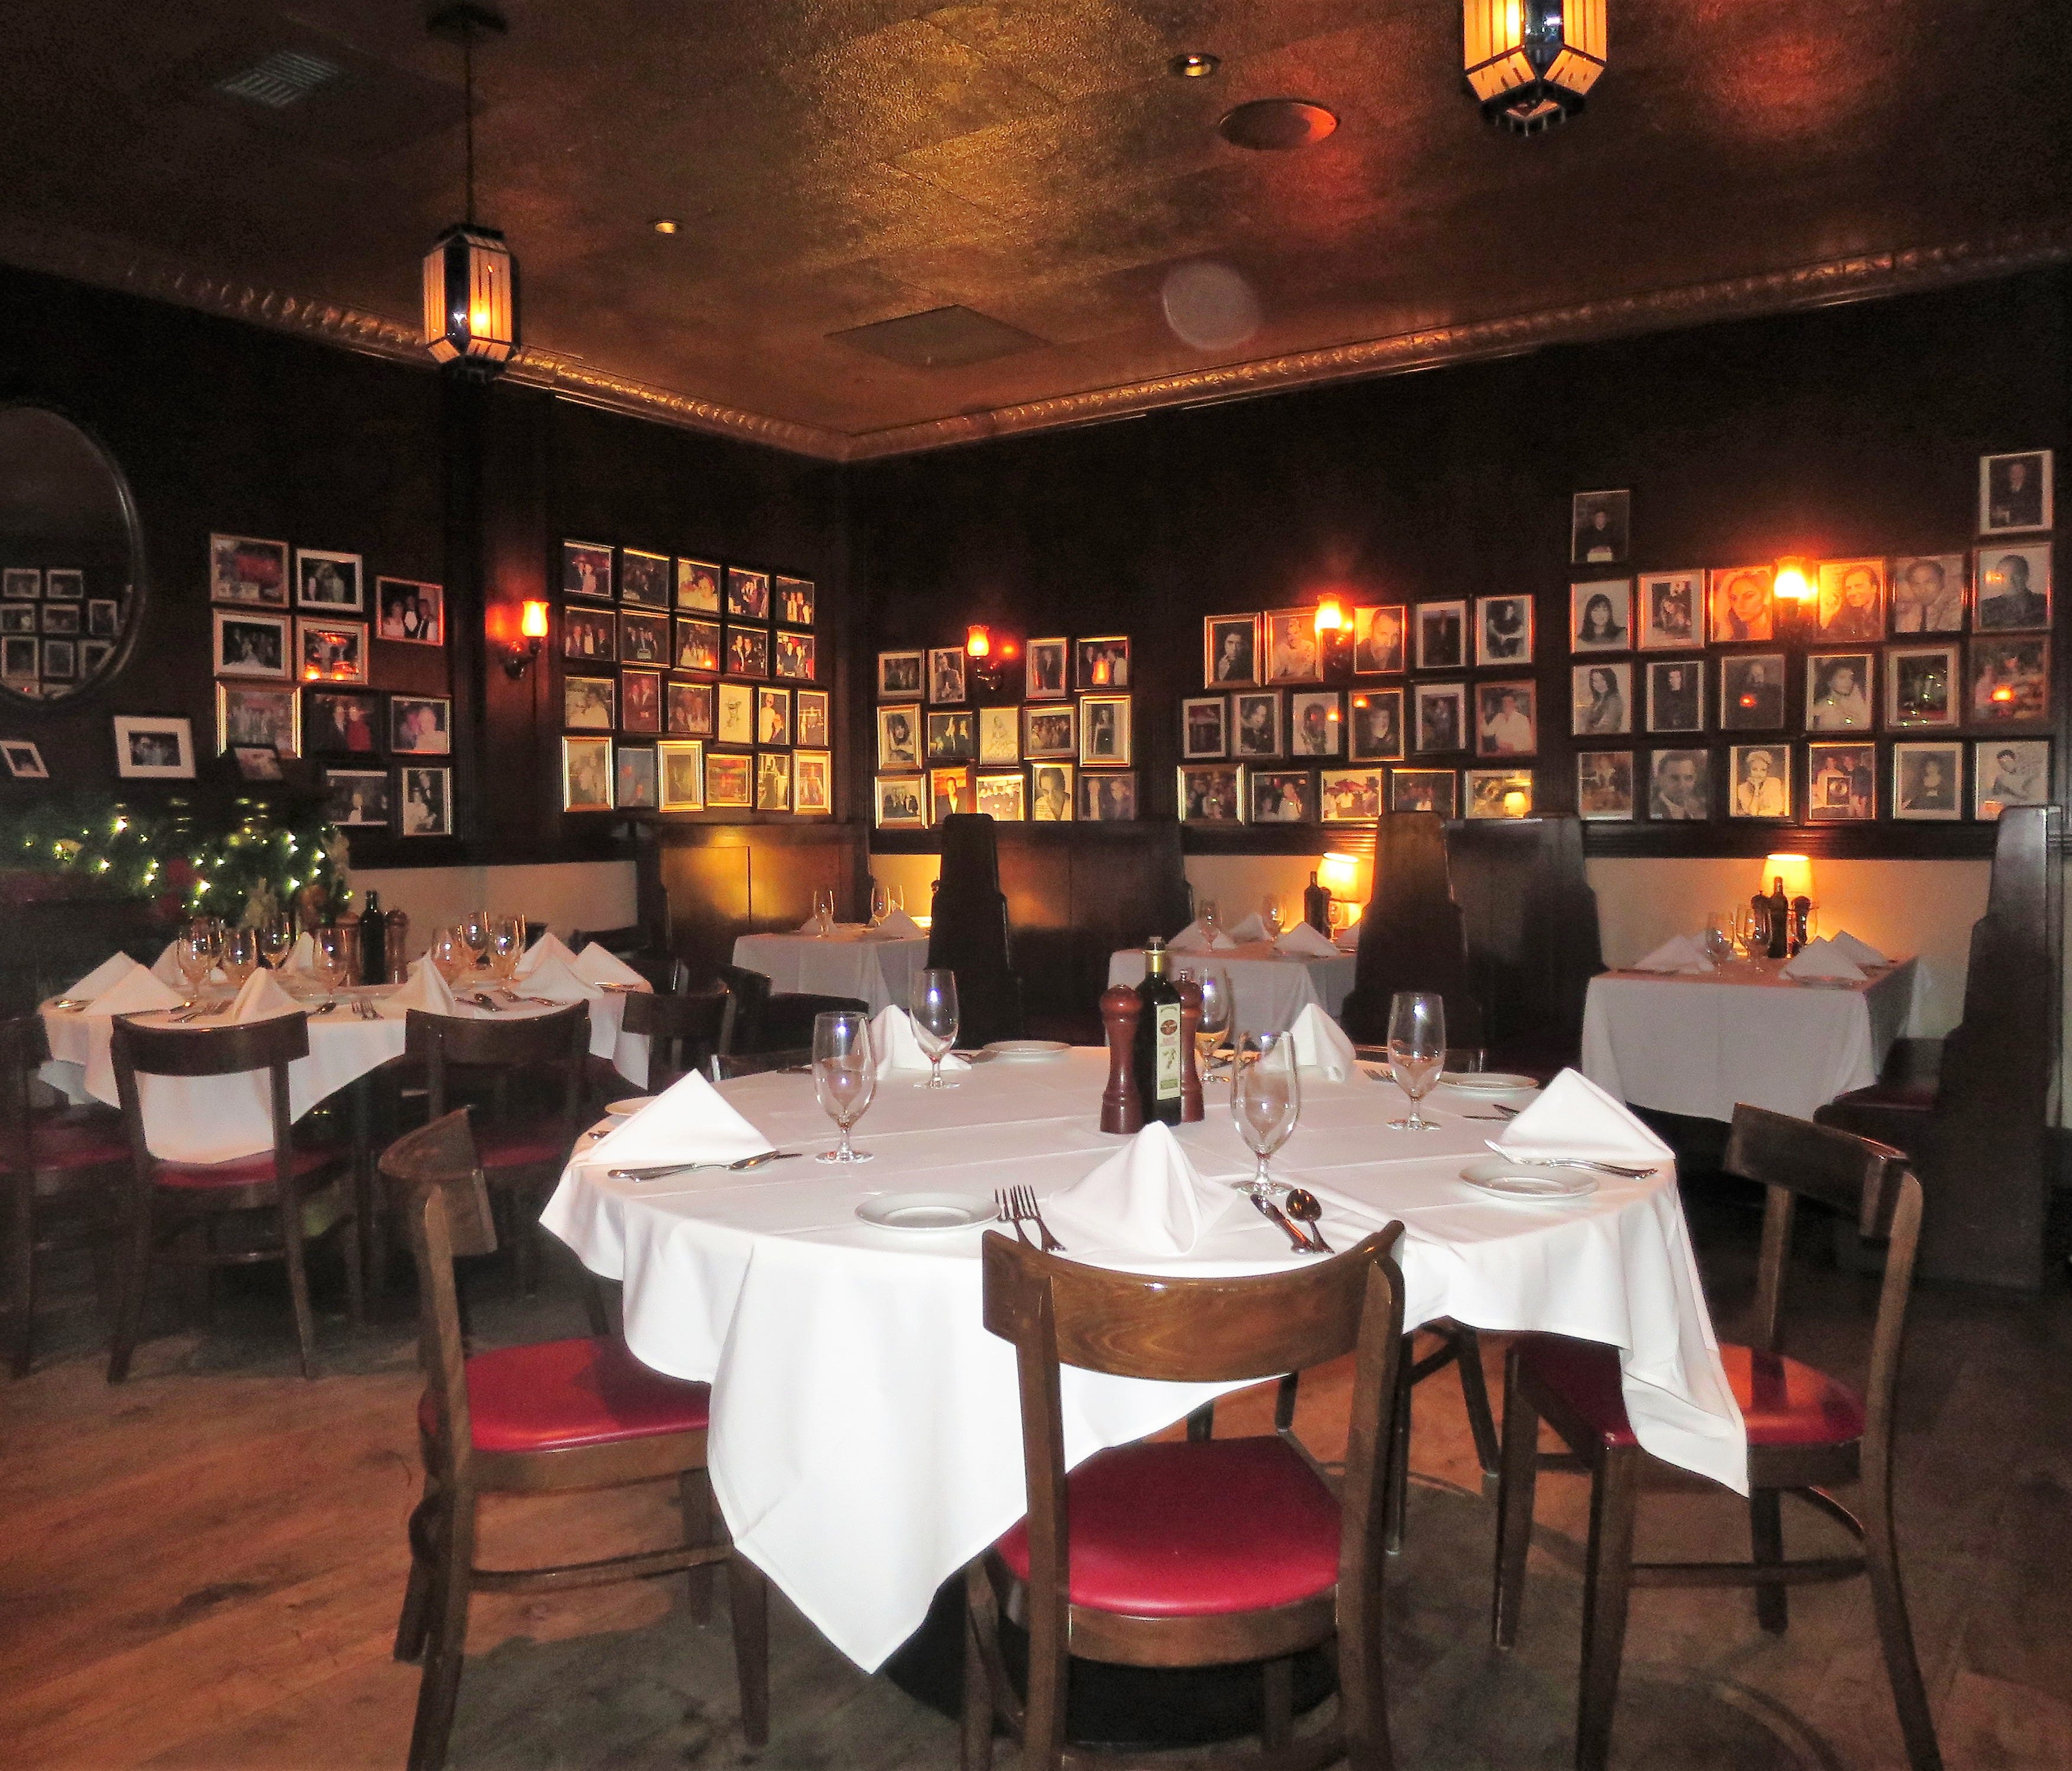 The main dining rooms in Las Vegas (pictured) and Los Angeles are both slightly larger near replicas of the century-old New York original, with worn wood floors and tons of celebrity photos.